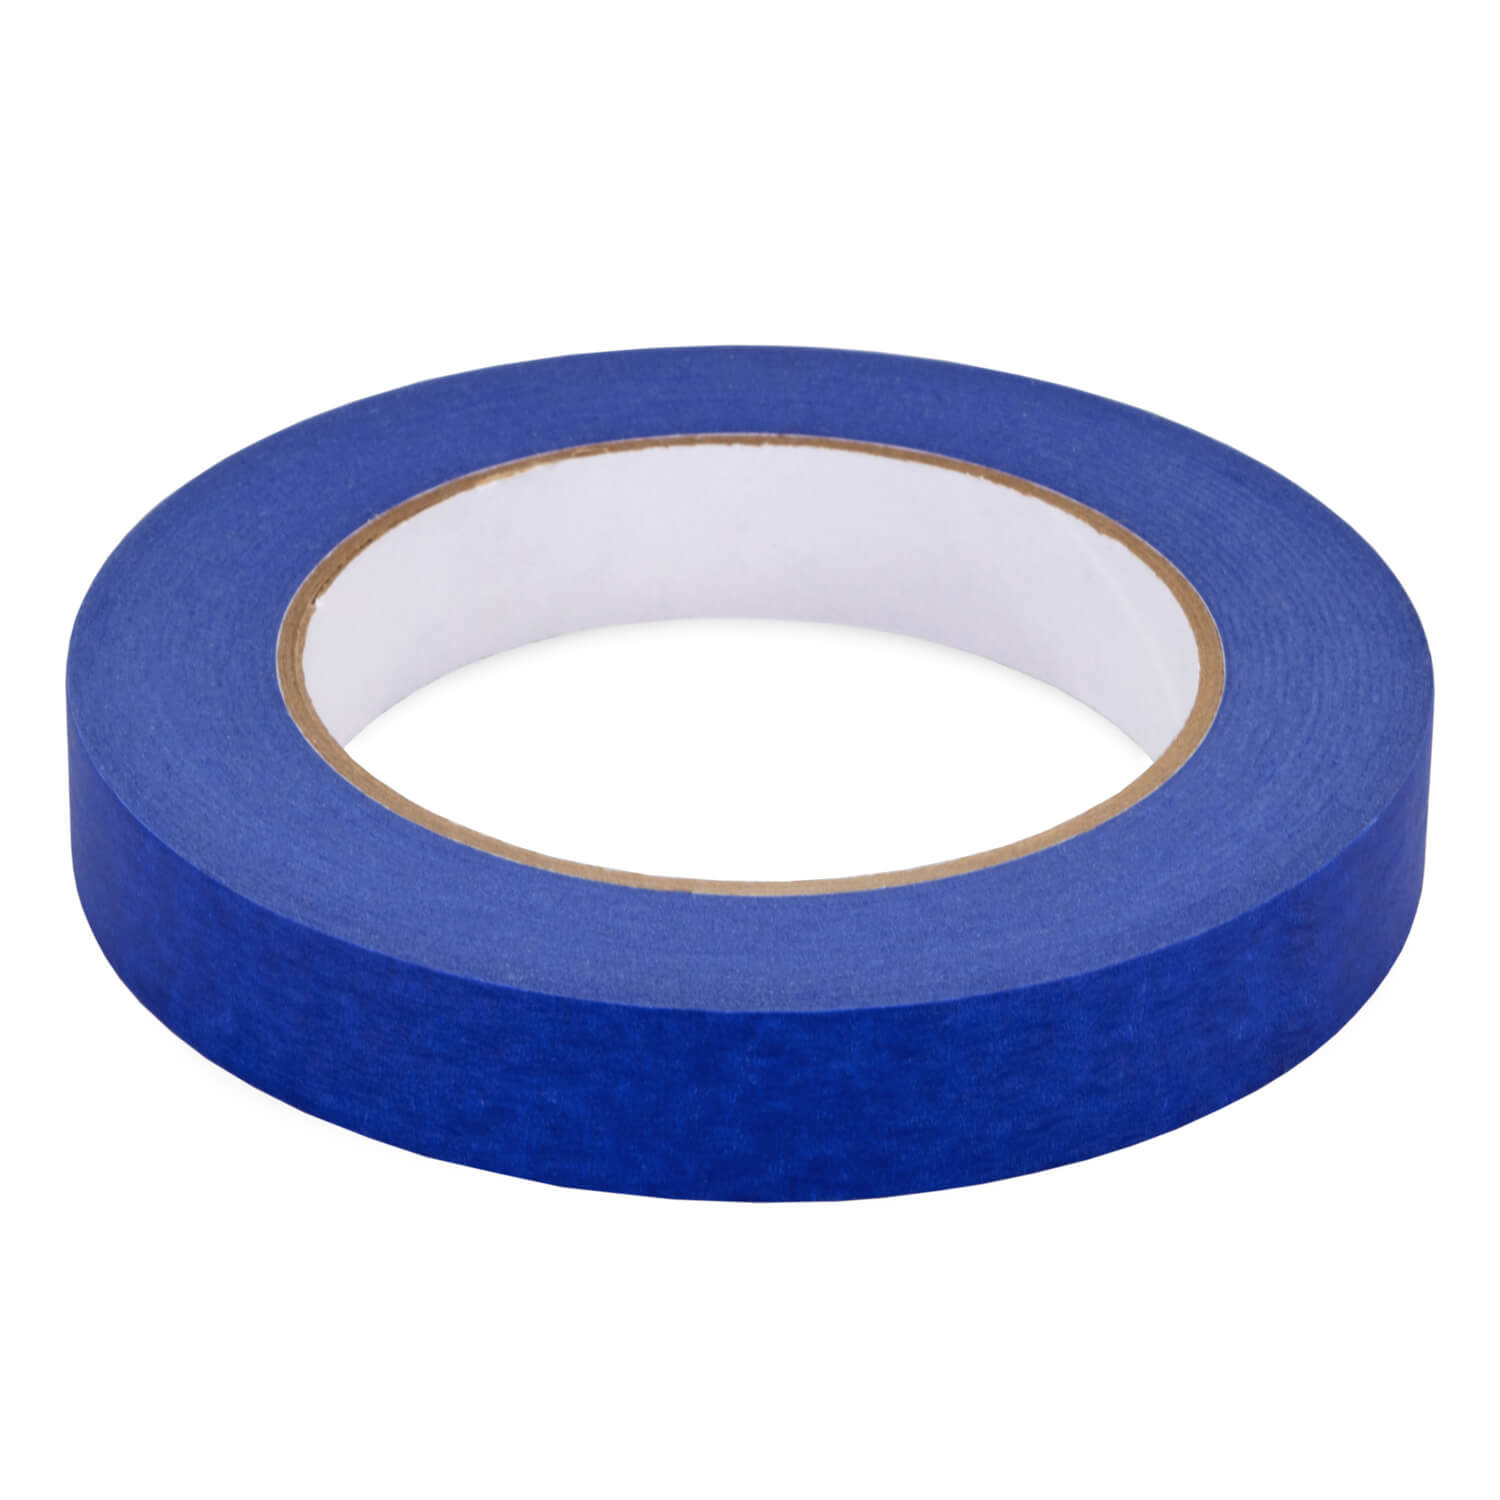 1 x 60 yards Blue Painters Tape for Painting, Natural Rubber buy in stock  in U.S. in IDL Packaging